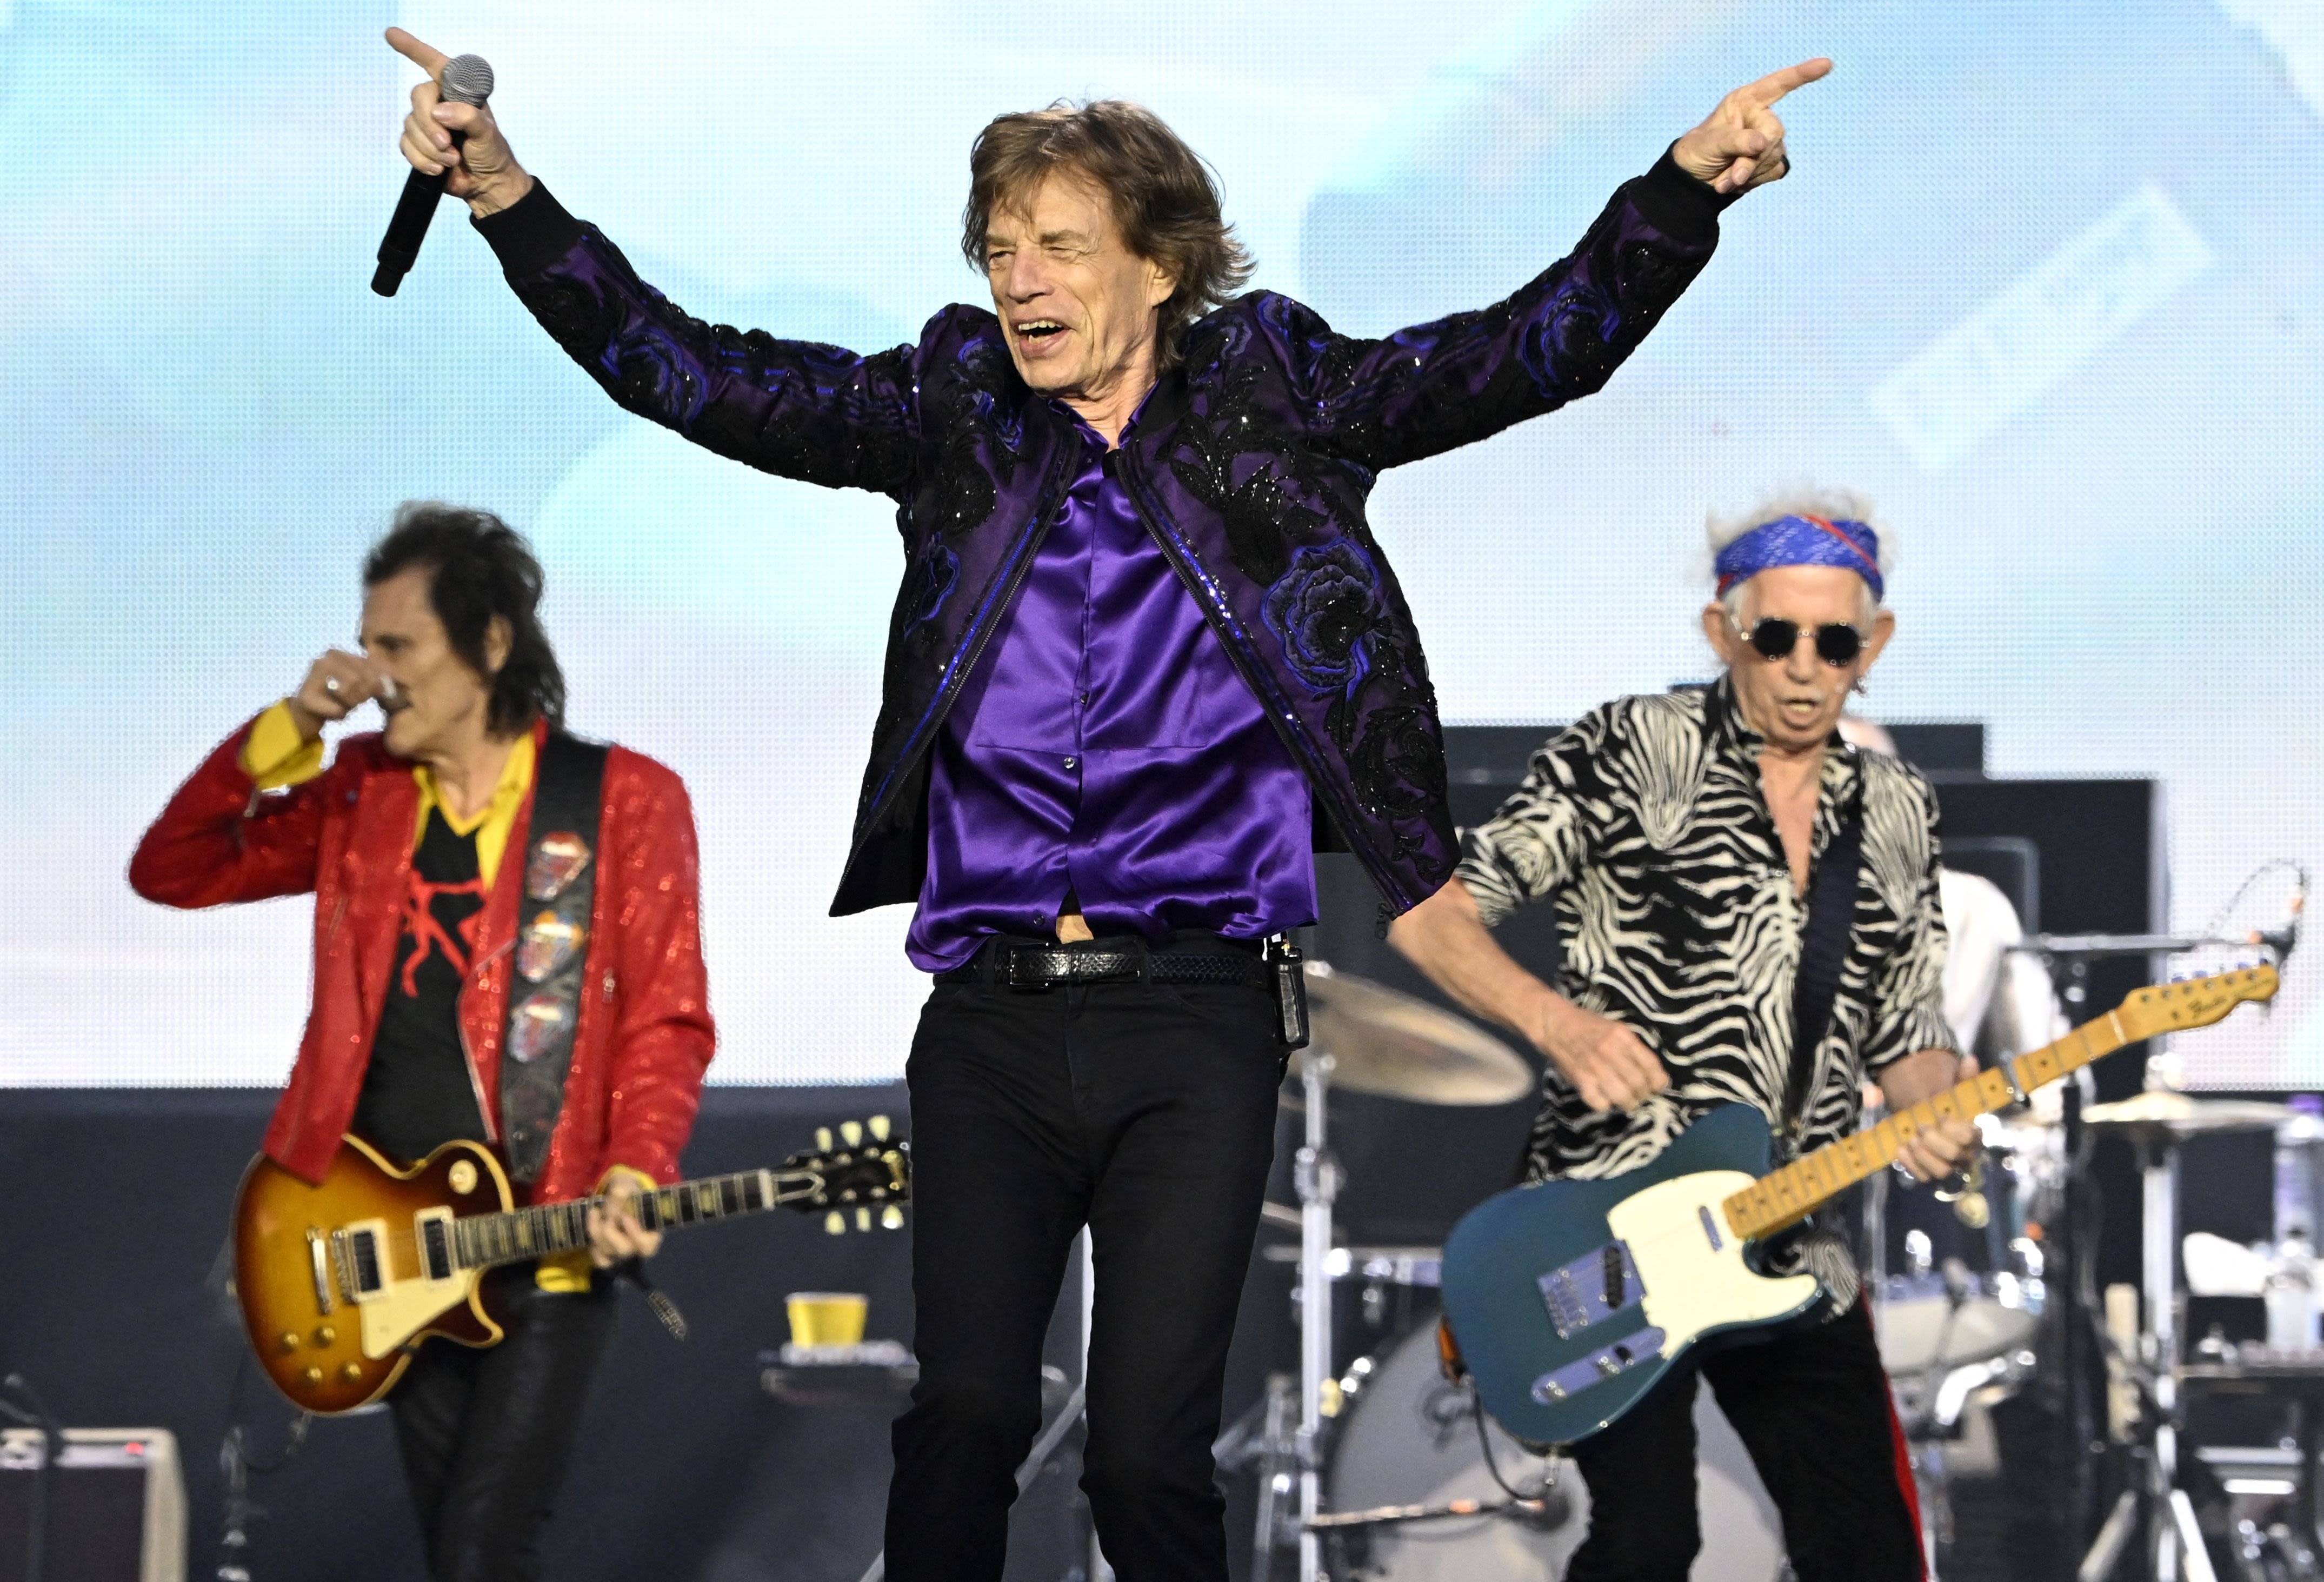 The Rolling Stones are hitting the road next year on a tour sponsored by  AARP